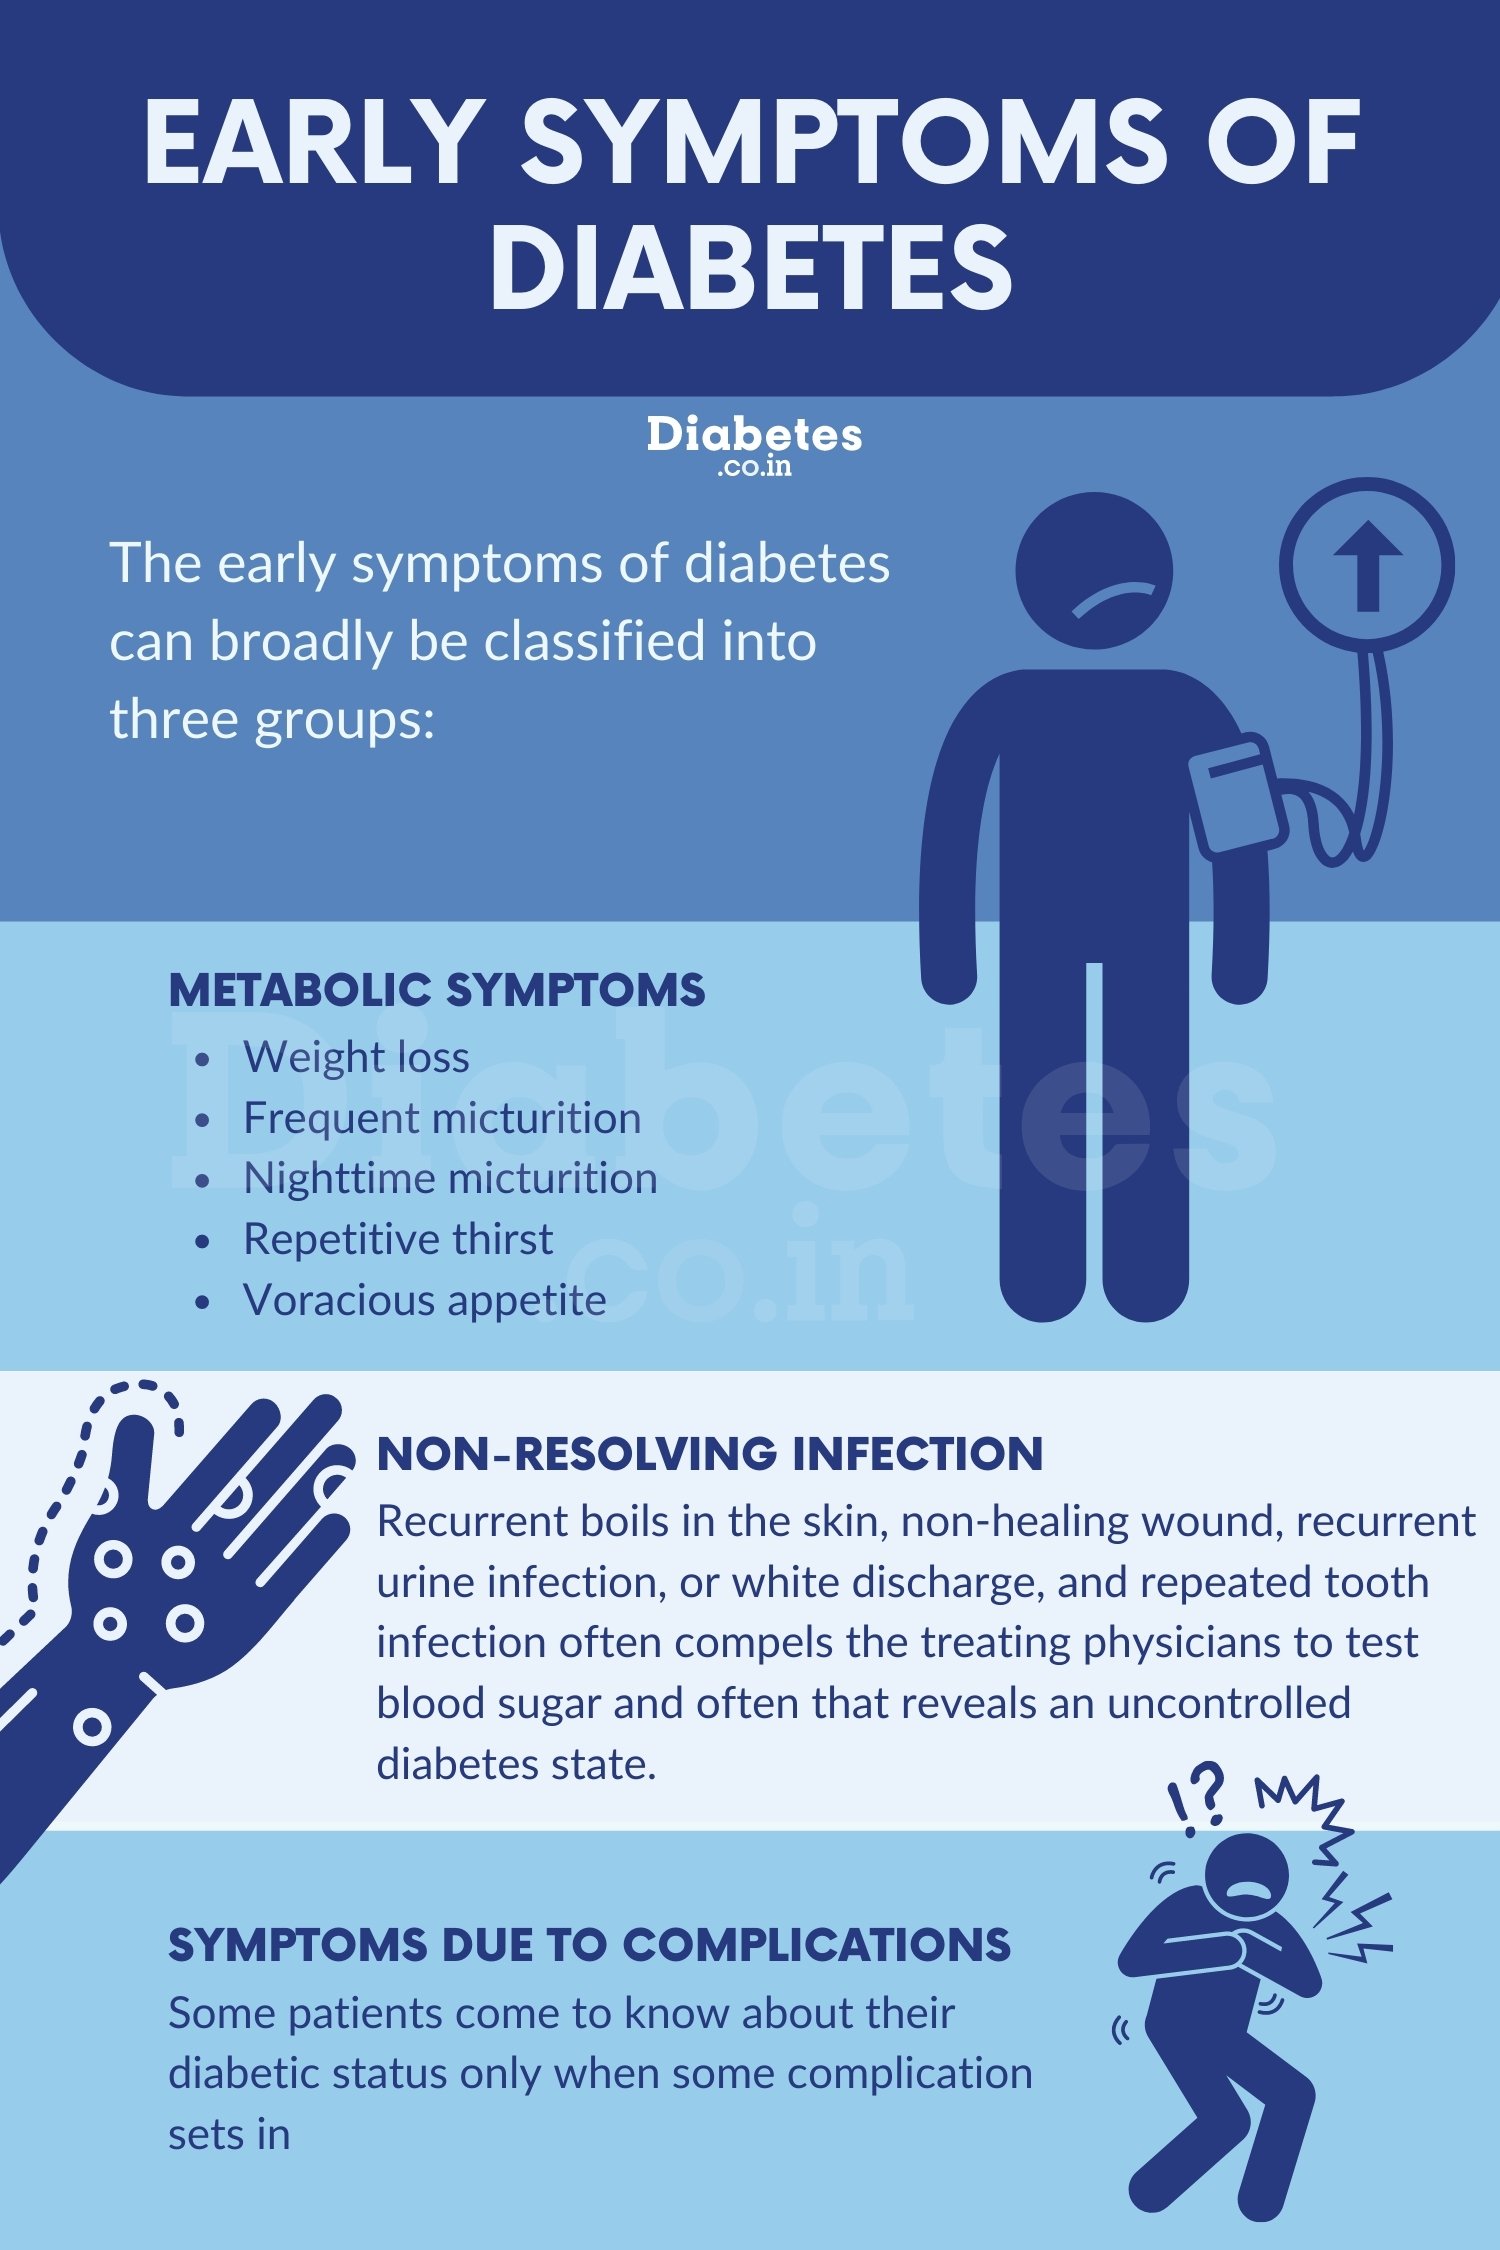 What are the Early Symptoms of Diabetes?